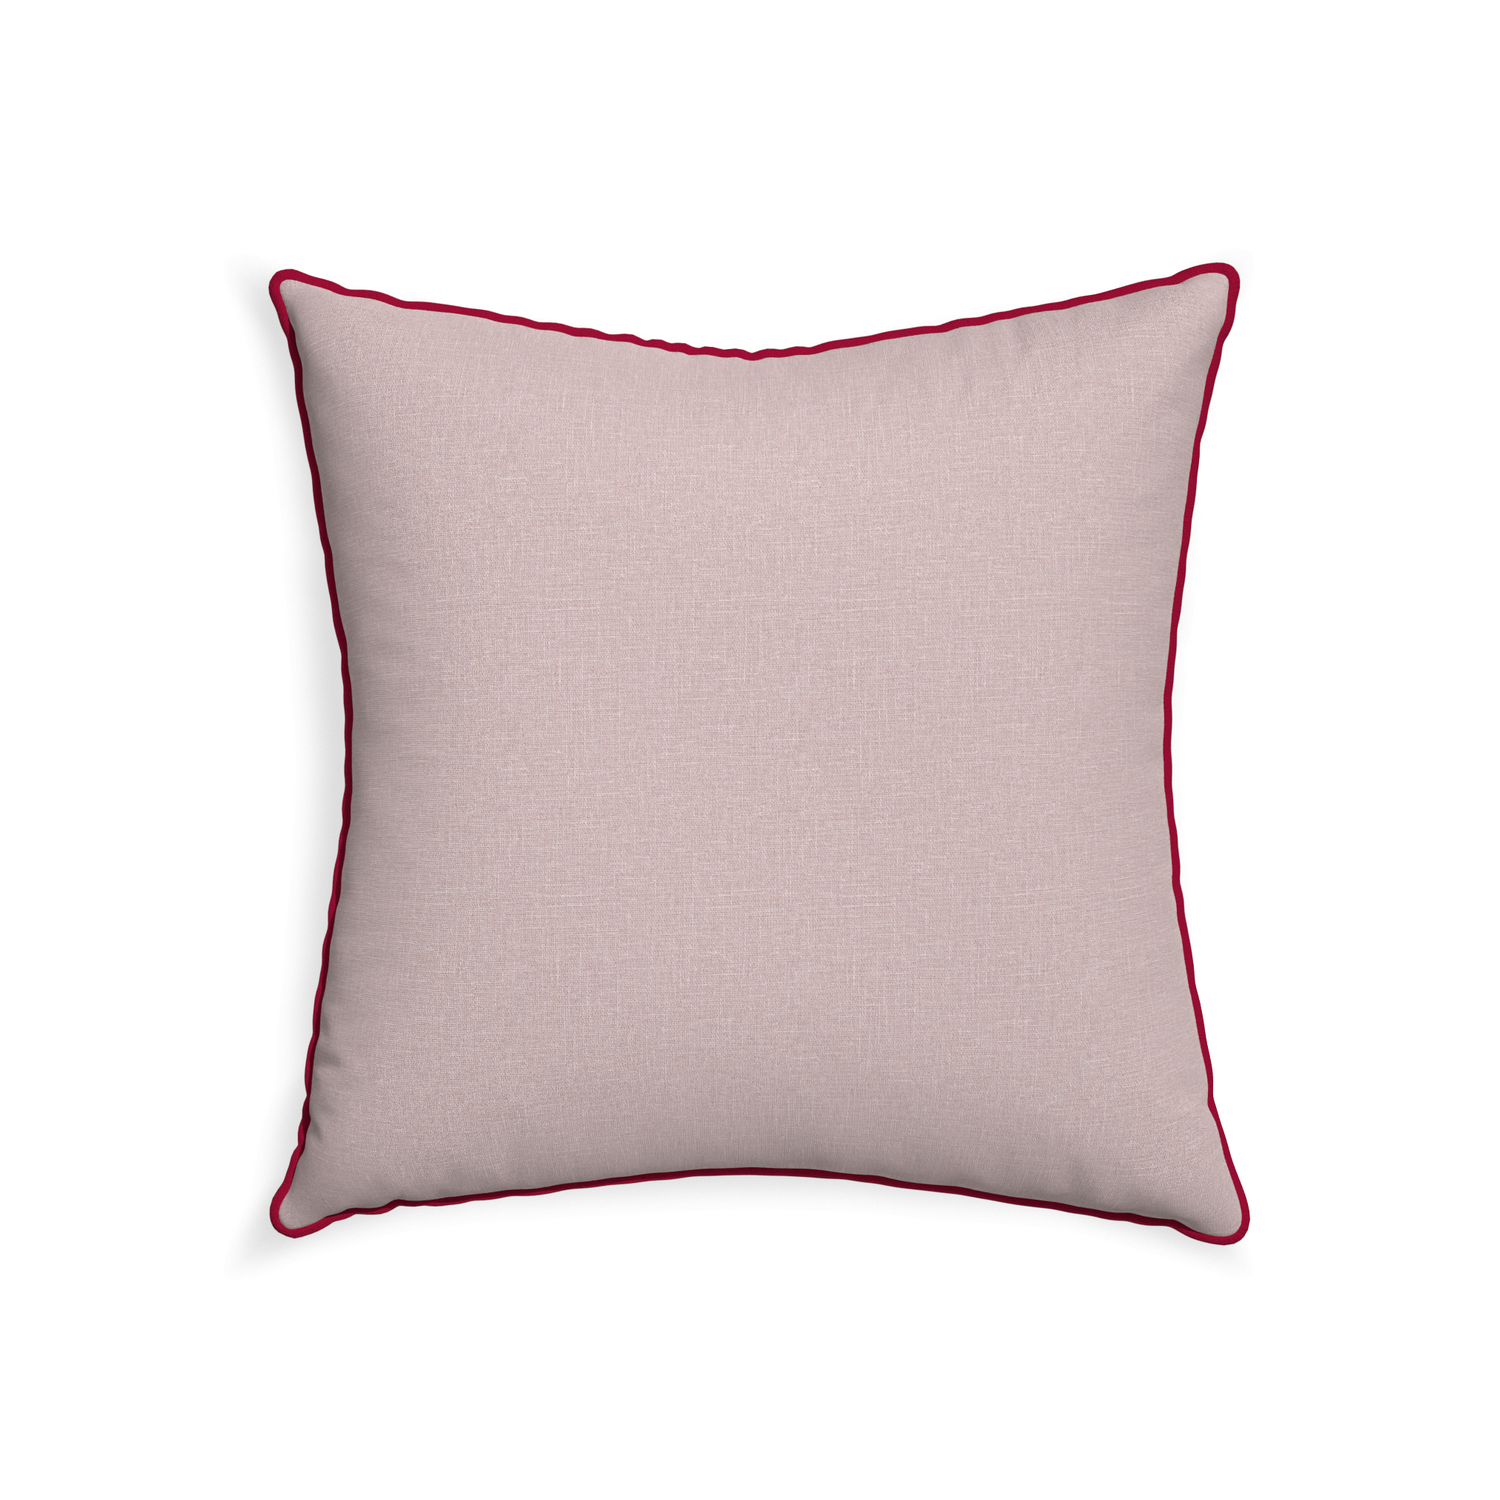 22-square orchid custom mauve pinkpillow with raspberry piping on white background